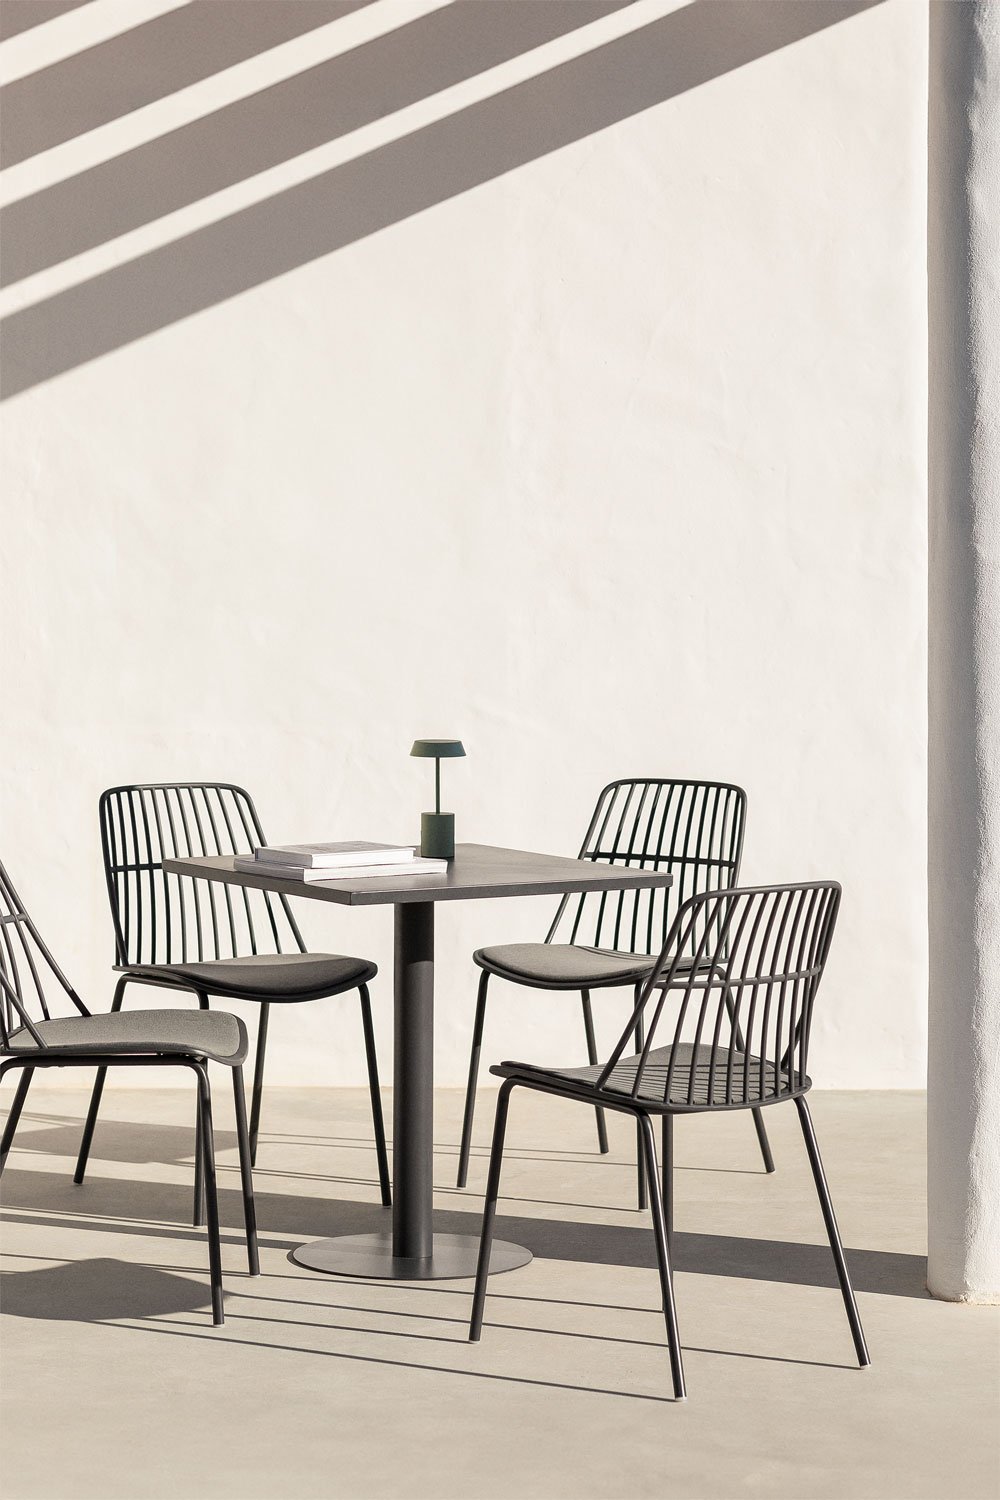 Mizzi Square Table Set 70x70 cm and 4 Maeba Garden Chairs, gallery image 1